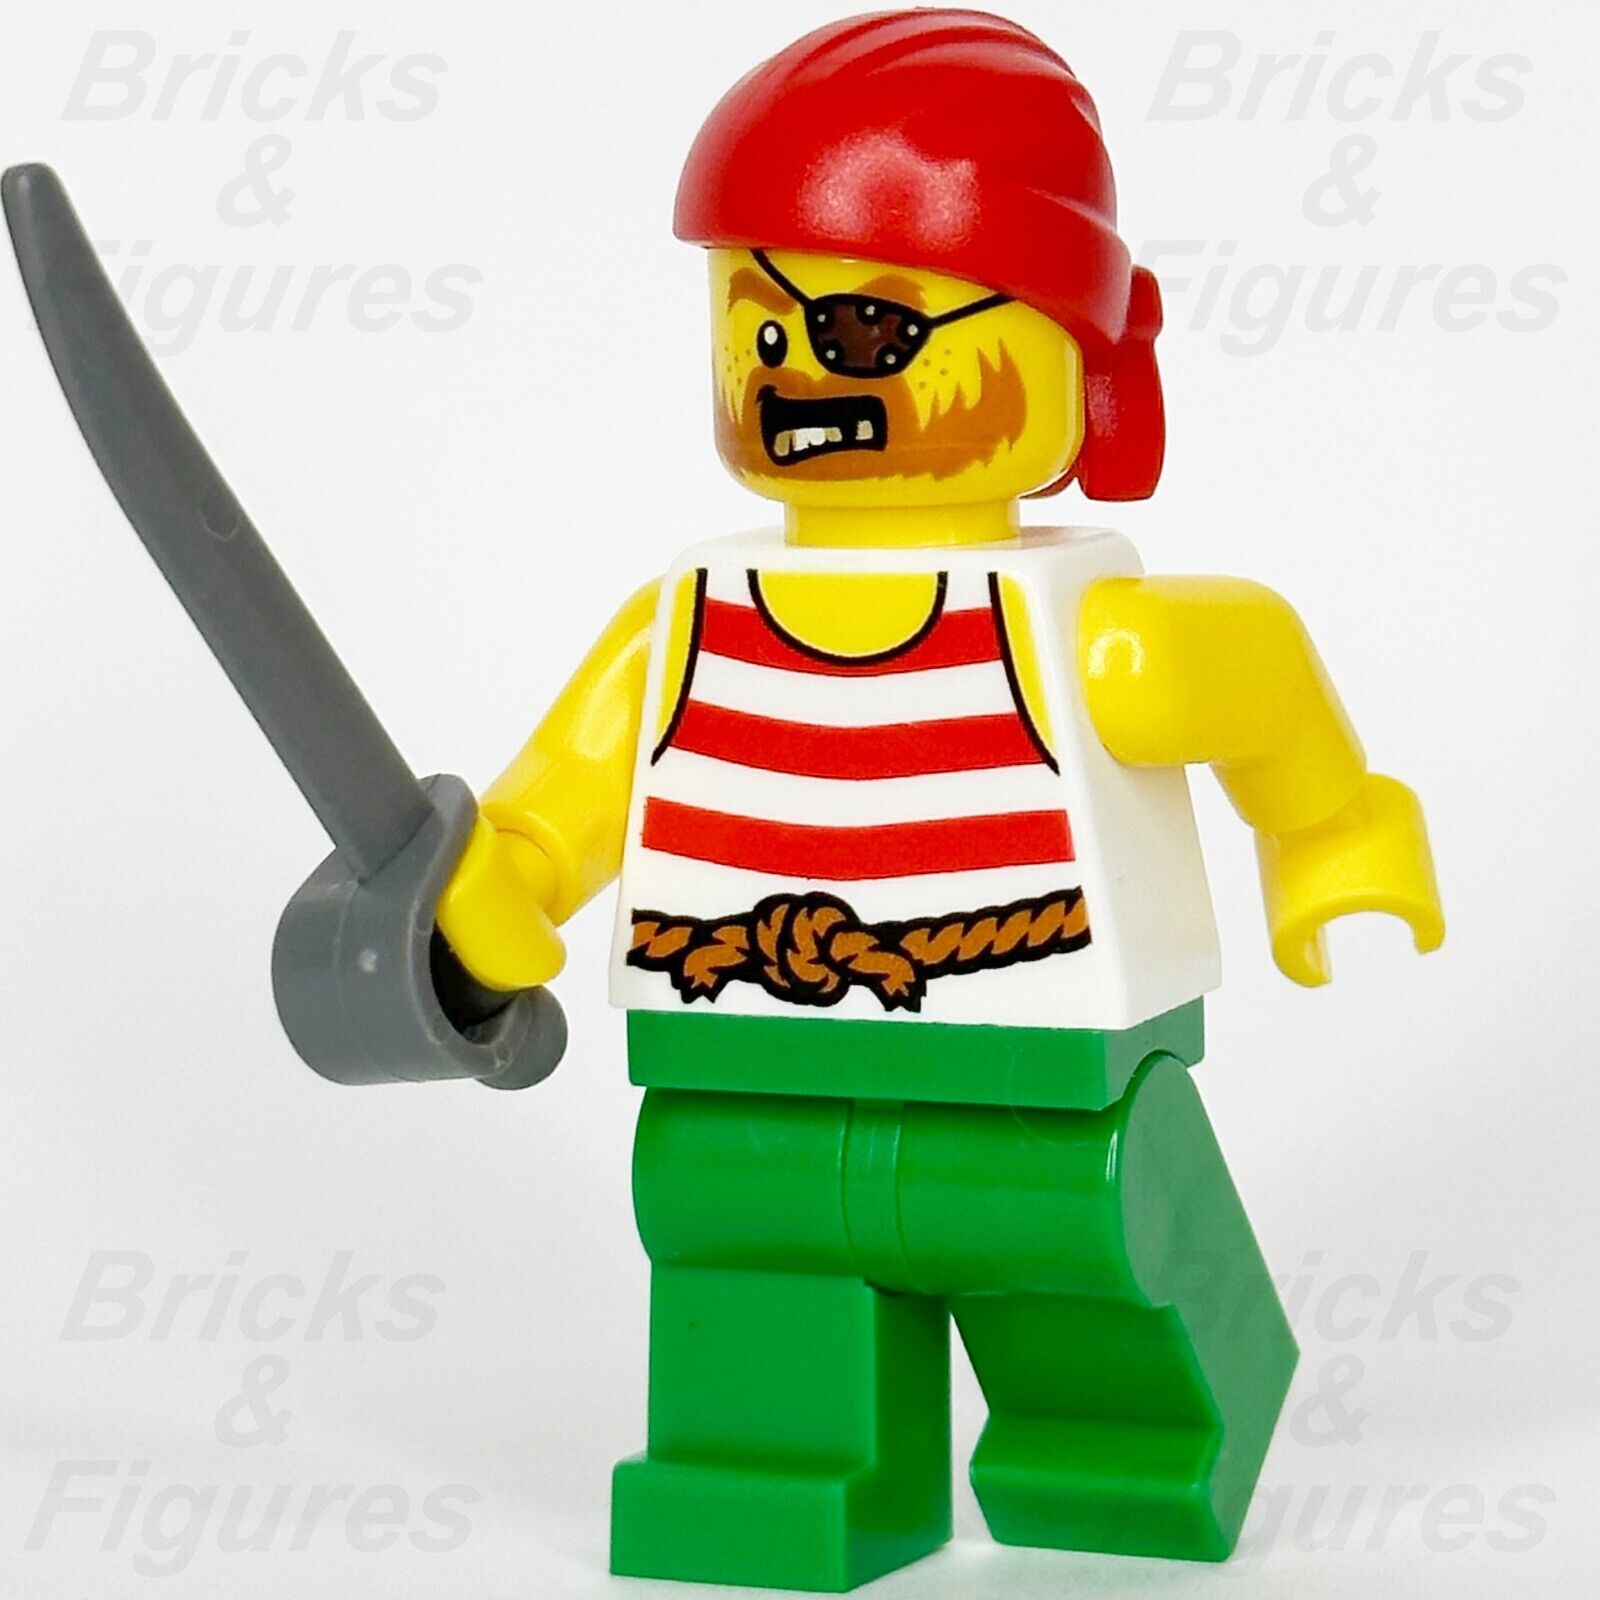 LEGO Pirate Minifigure Red Bandana Icons Pirates Imperial Soldiers 10320 pi190 - Bricks & Figures